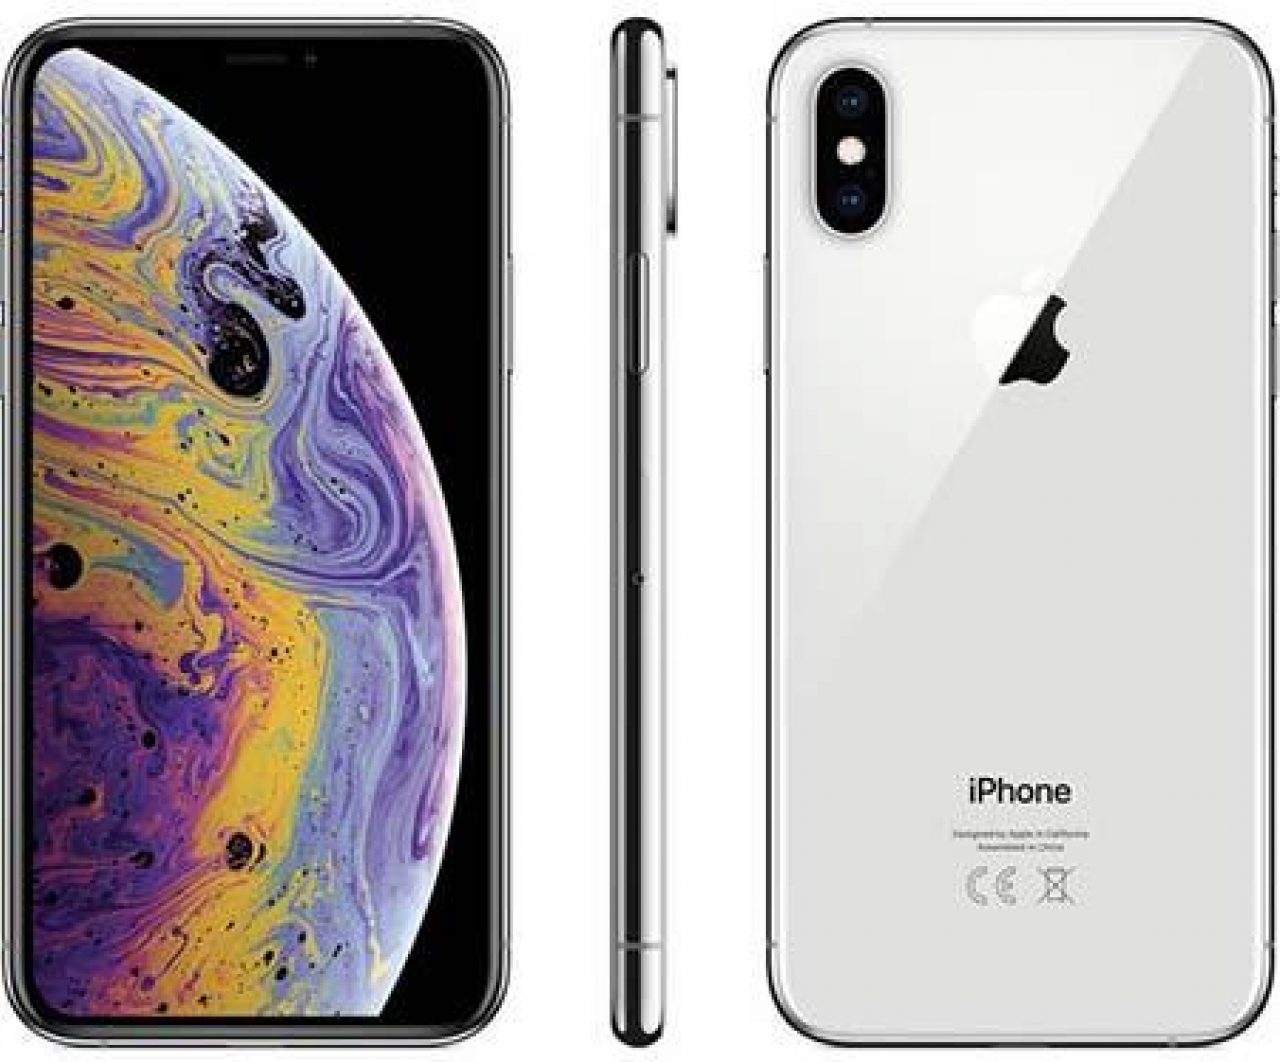 Apple iPhone Xs Review